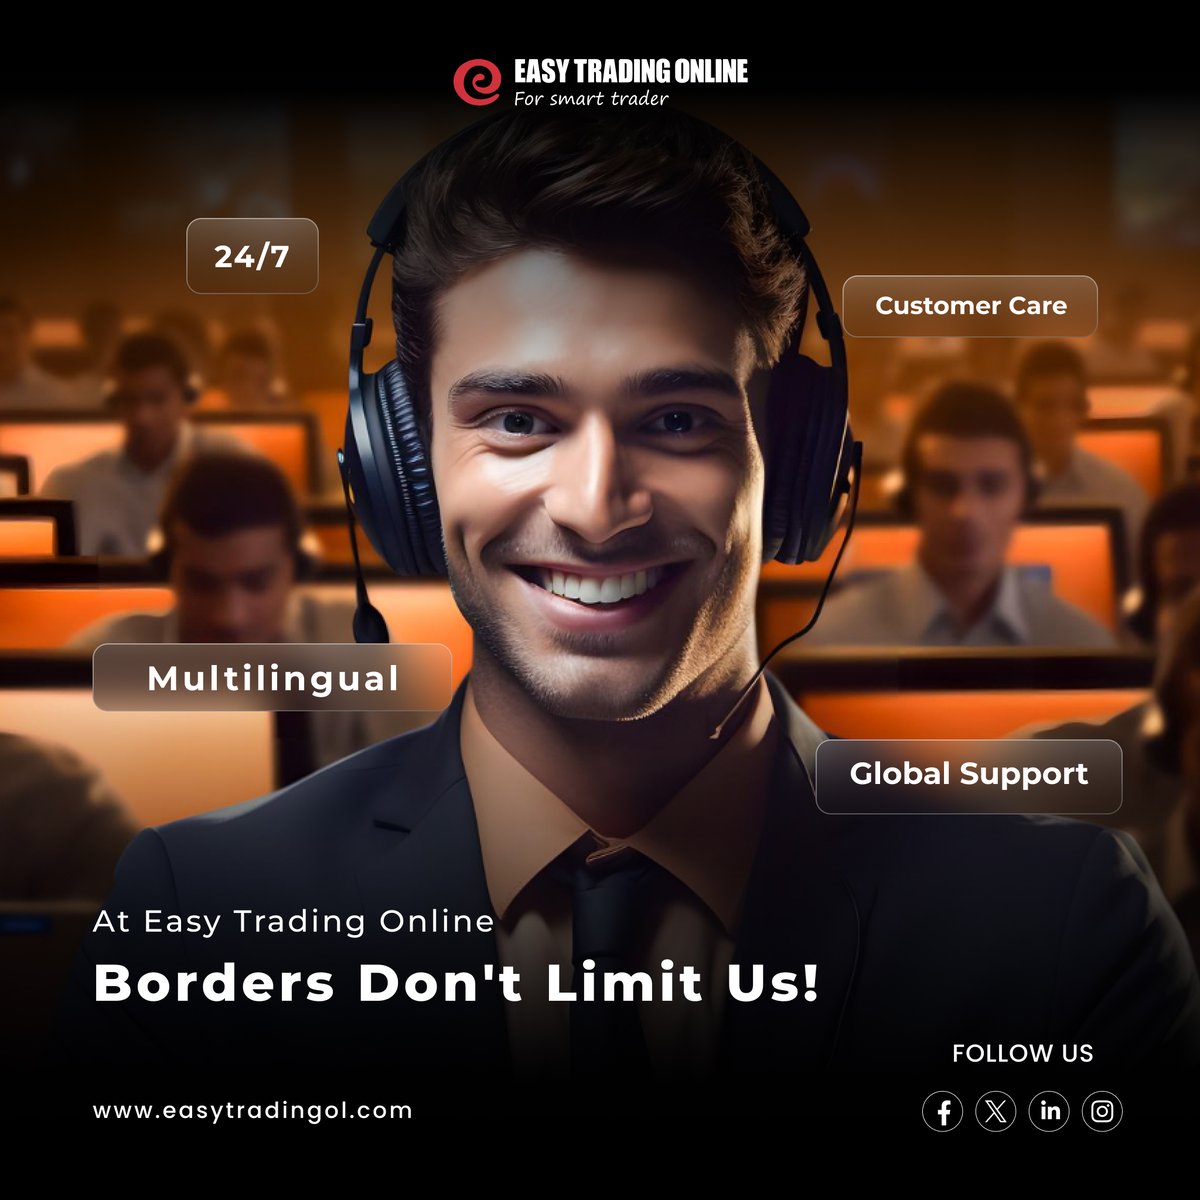 🌐 Our Customer Support Team speaks Thai, English, Arabic, Emirati, Spanish, and over ten other languages.

💬 We’re here to ensure your Forex trading journey is seamless, no matter the language you speak.

#EasyTradingOnline #ForexTrading #MultilingualSupport